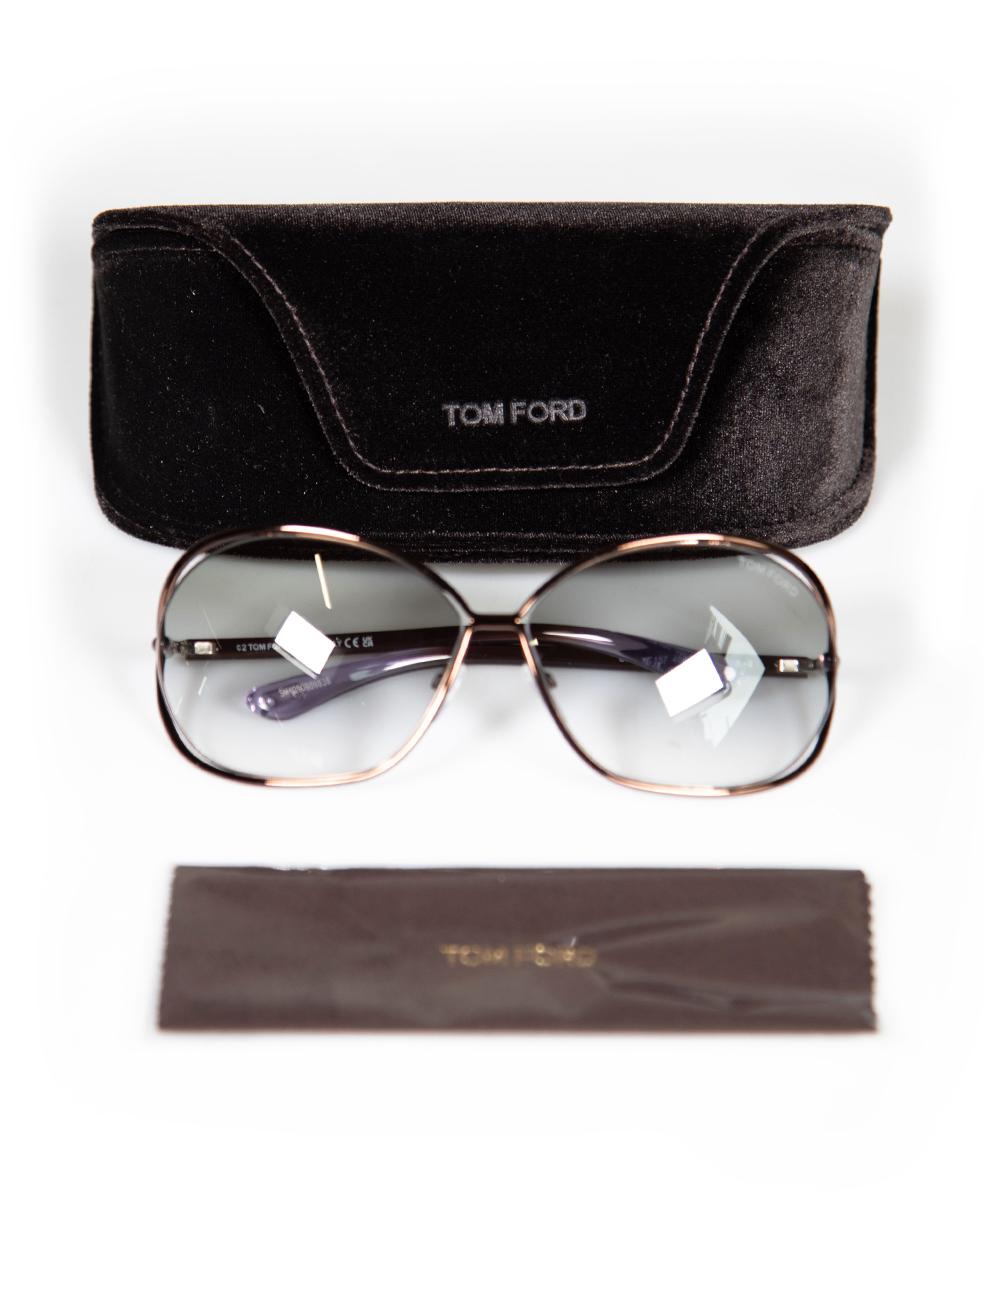 Tom Ford Carla Brown Gradient Round Sunglasses For Sale 4